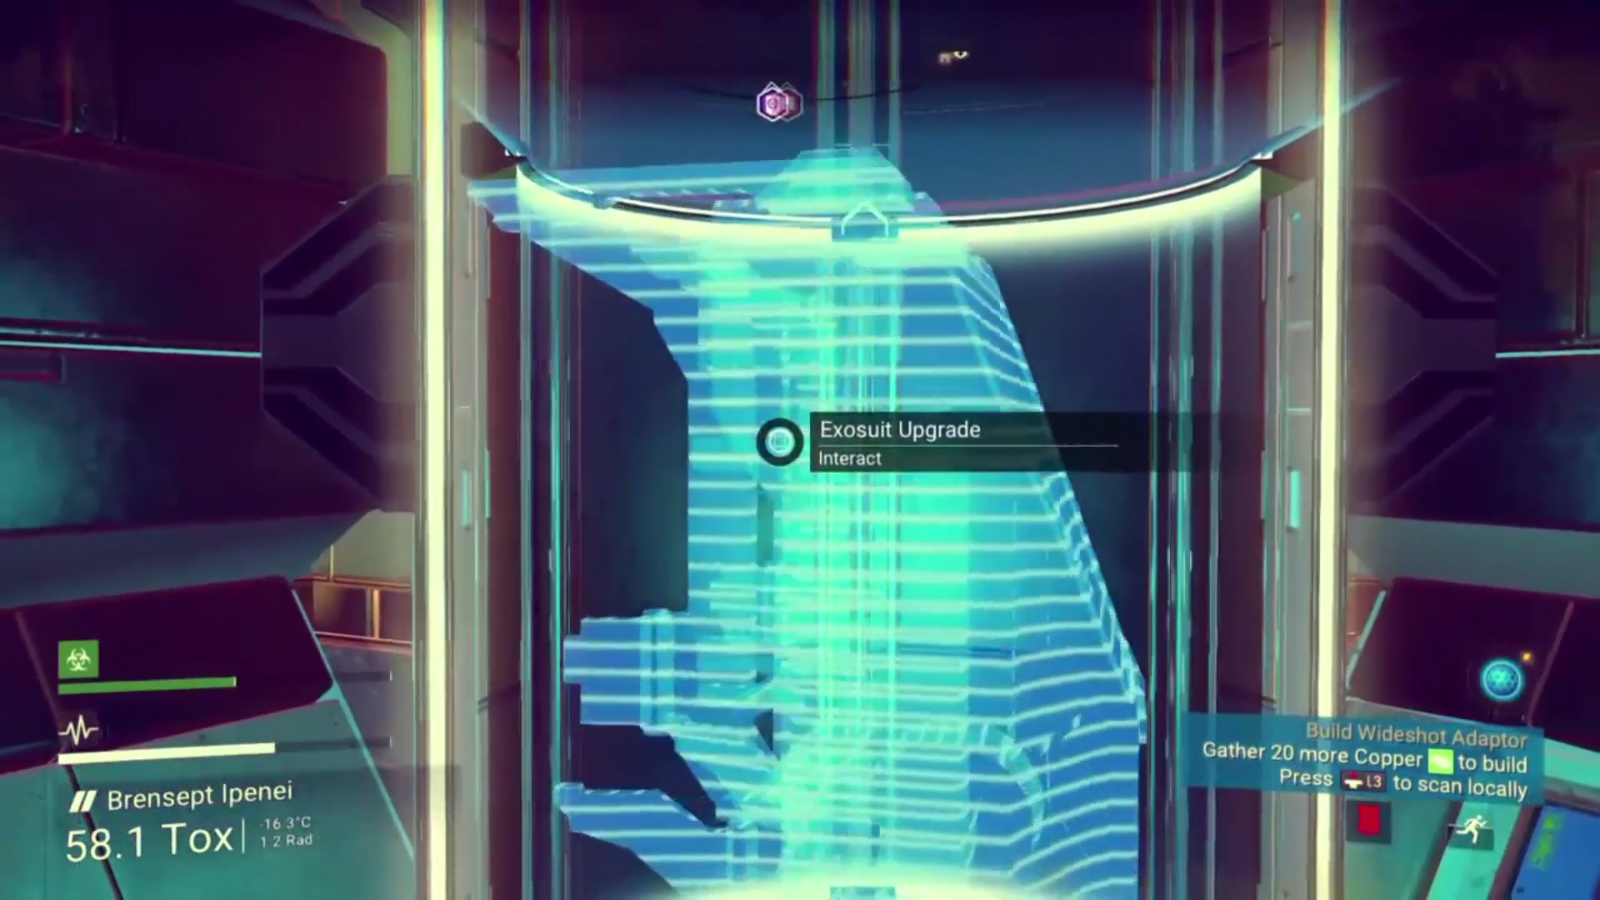 No Man's Sky: How To Upgrade Your Exosuit's Storage Capacity - GAMR